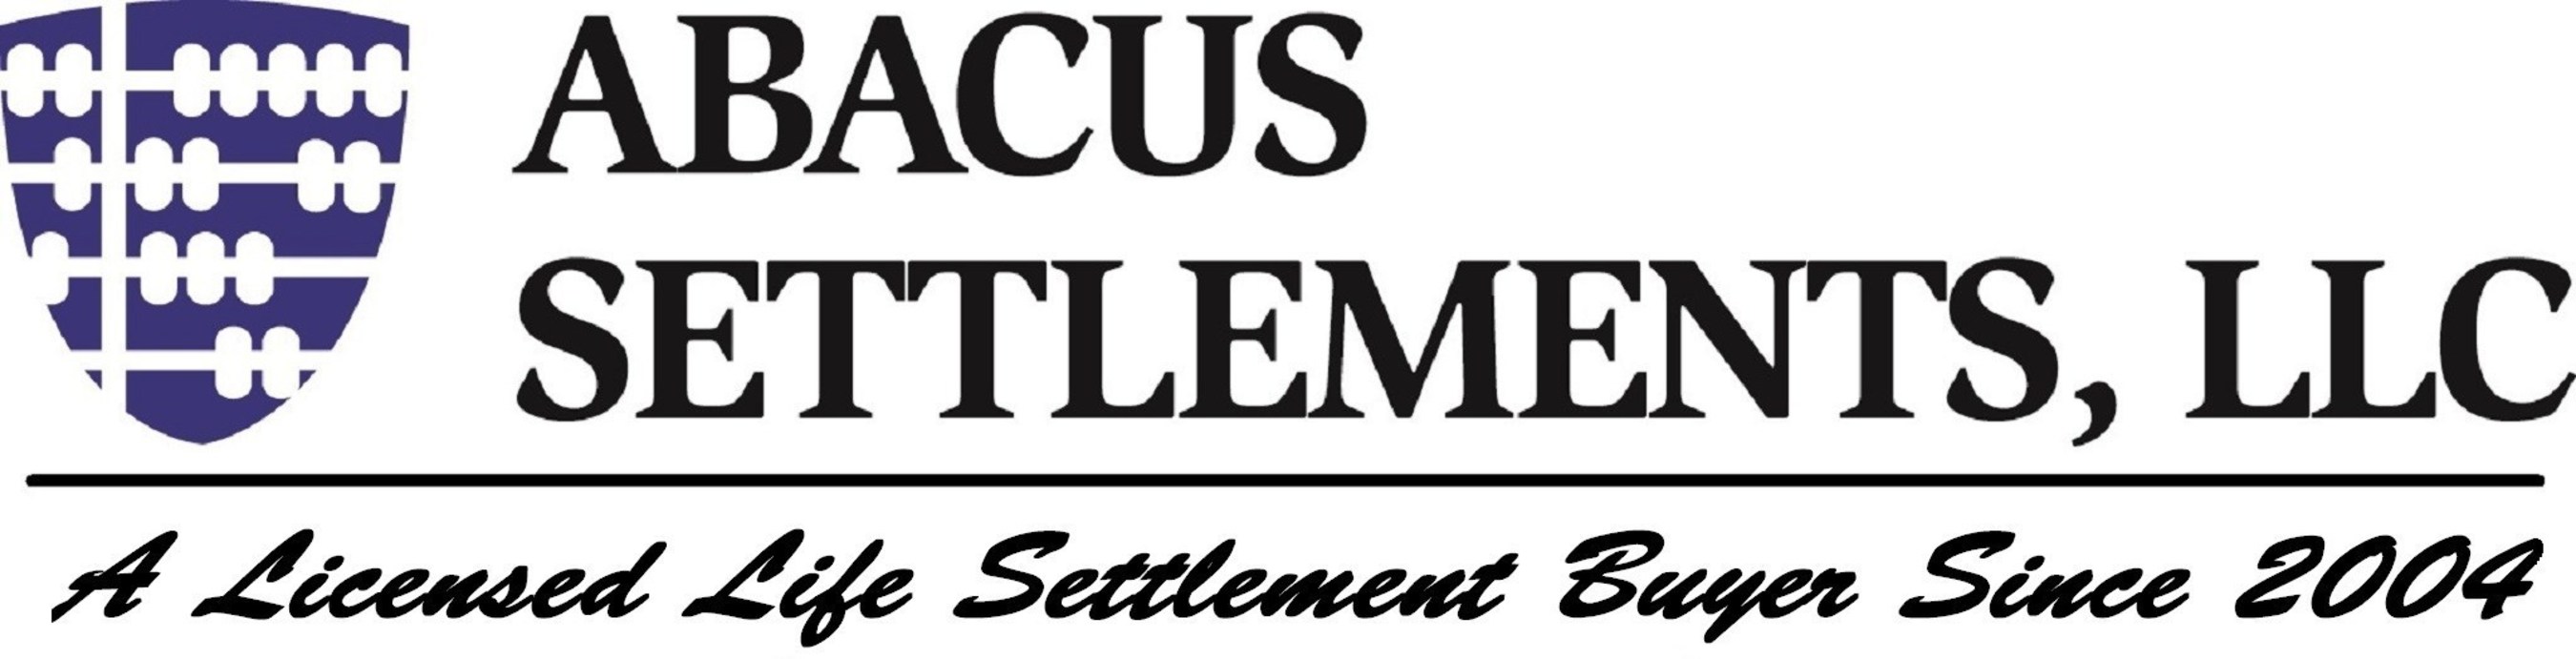 Abacus Life Settlements is a licensed life settlement buyer since 2004. Originally formed in New York's financial district and now with offices in NY & Tennessee, Abacus Settlements, is a distinguished Provider of Life Settlements since 2004. Abacus shareholders and officers have been leaders in the Life Settlement industry since the industries inception in the mid 90's. Abacus Life Settlements strongly supports regulation that protects Consumers. Call Us Today 615-732-6241  https://abacuslifesettlements.com (PRNewsFoto/Abacus Life Settlements)